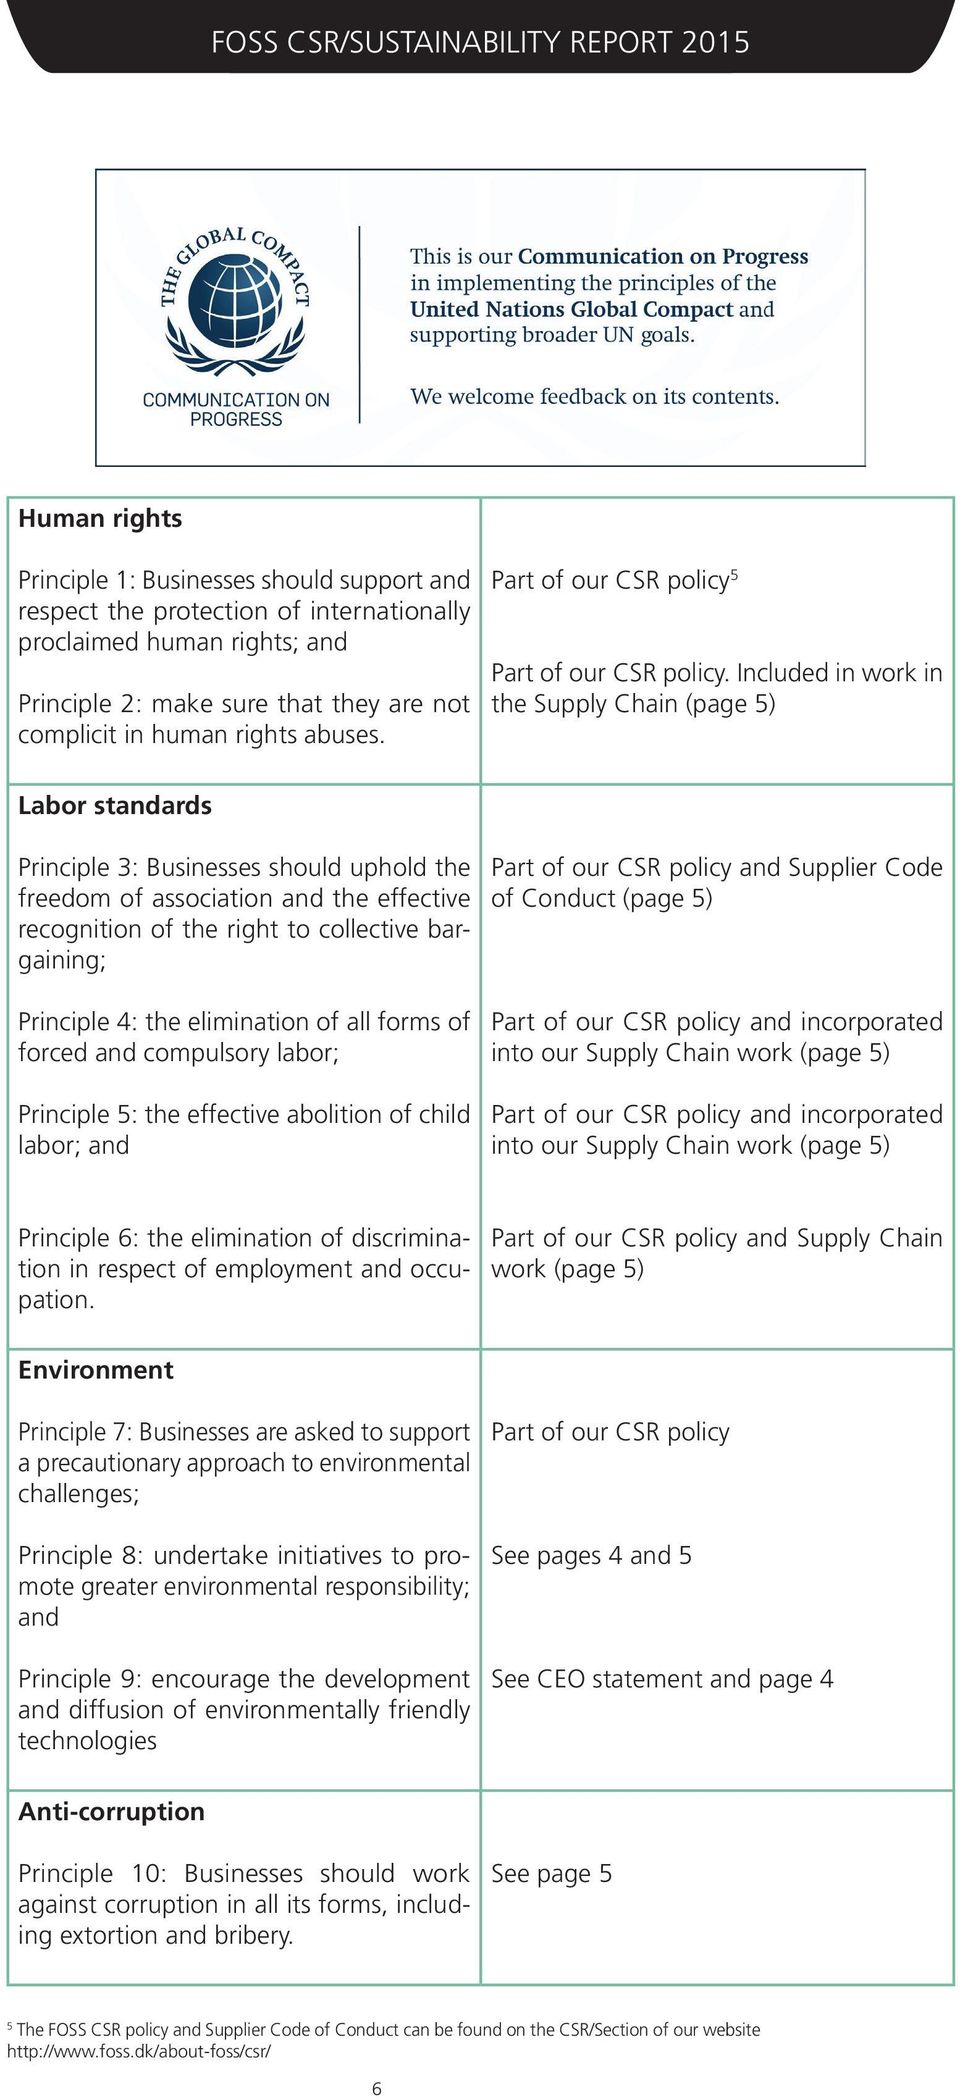 Included in work in the Supply Chain (page 5) Labor standards Principle 3: Businesses should uphold the freedom of association and the effective recognition of the right to collective bargaining;